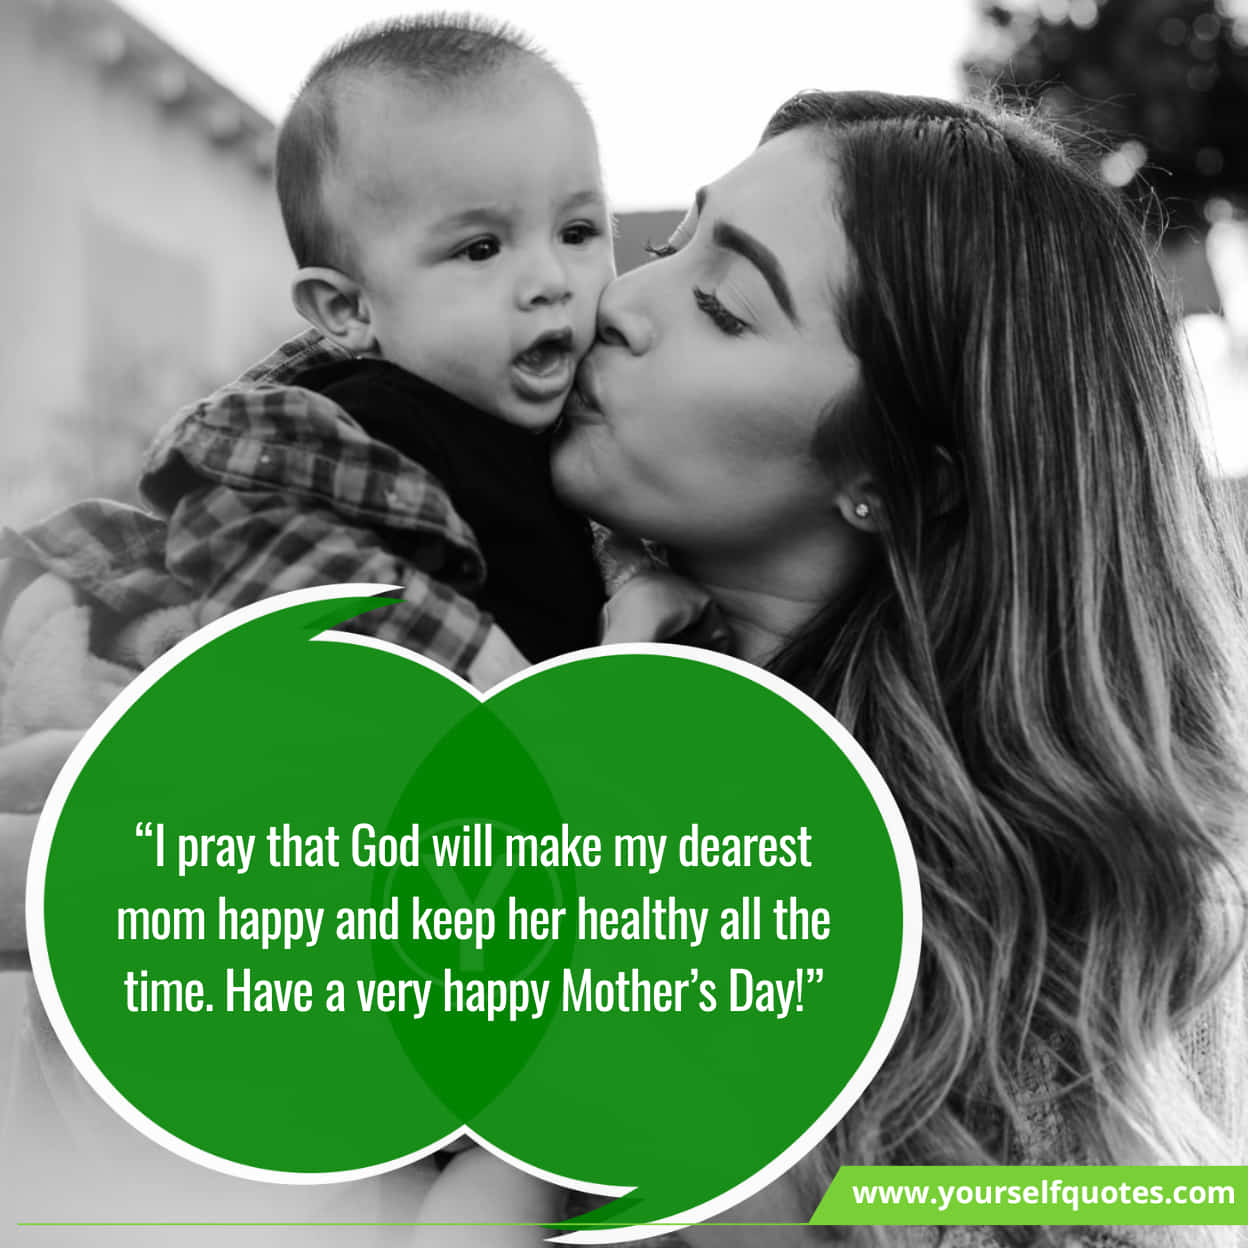 Happy Mothers Day Quotes, Wishes, Images